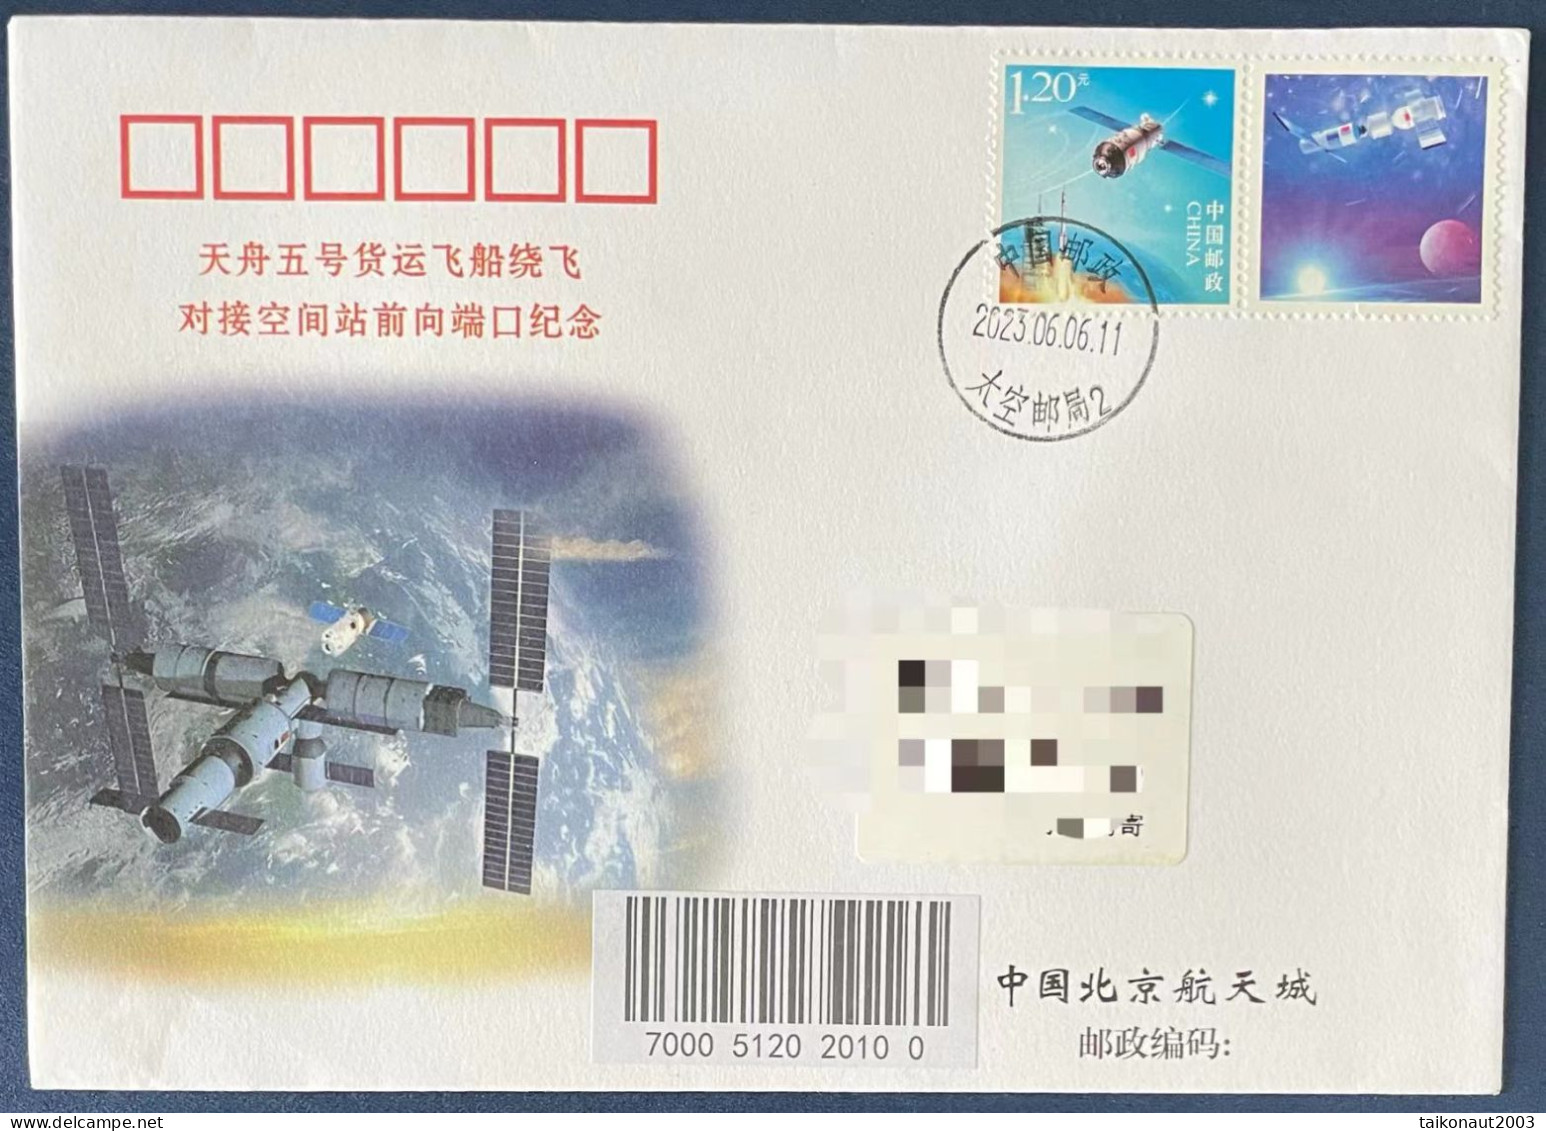 China Space 2023 TianZhou-5 Cargo Spacecraft Docking China Space Station Cover - Asien